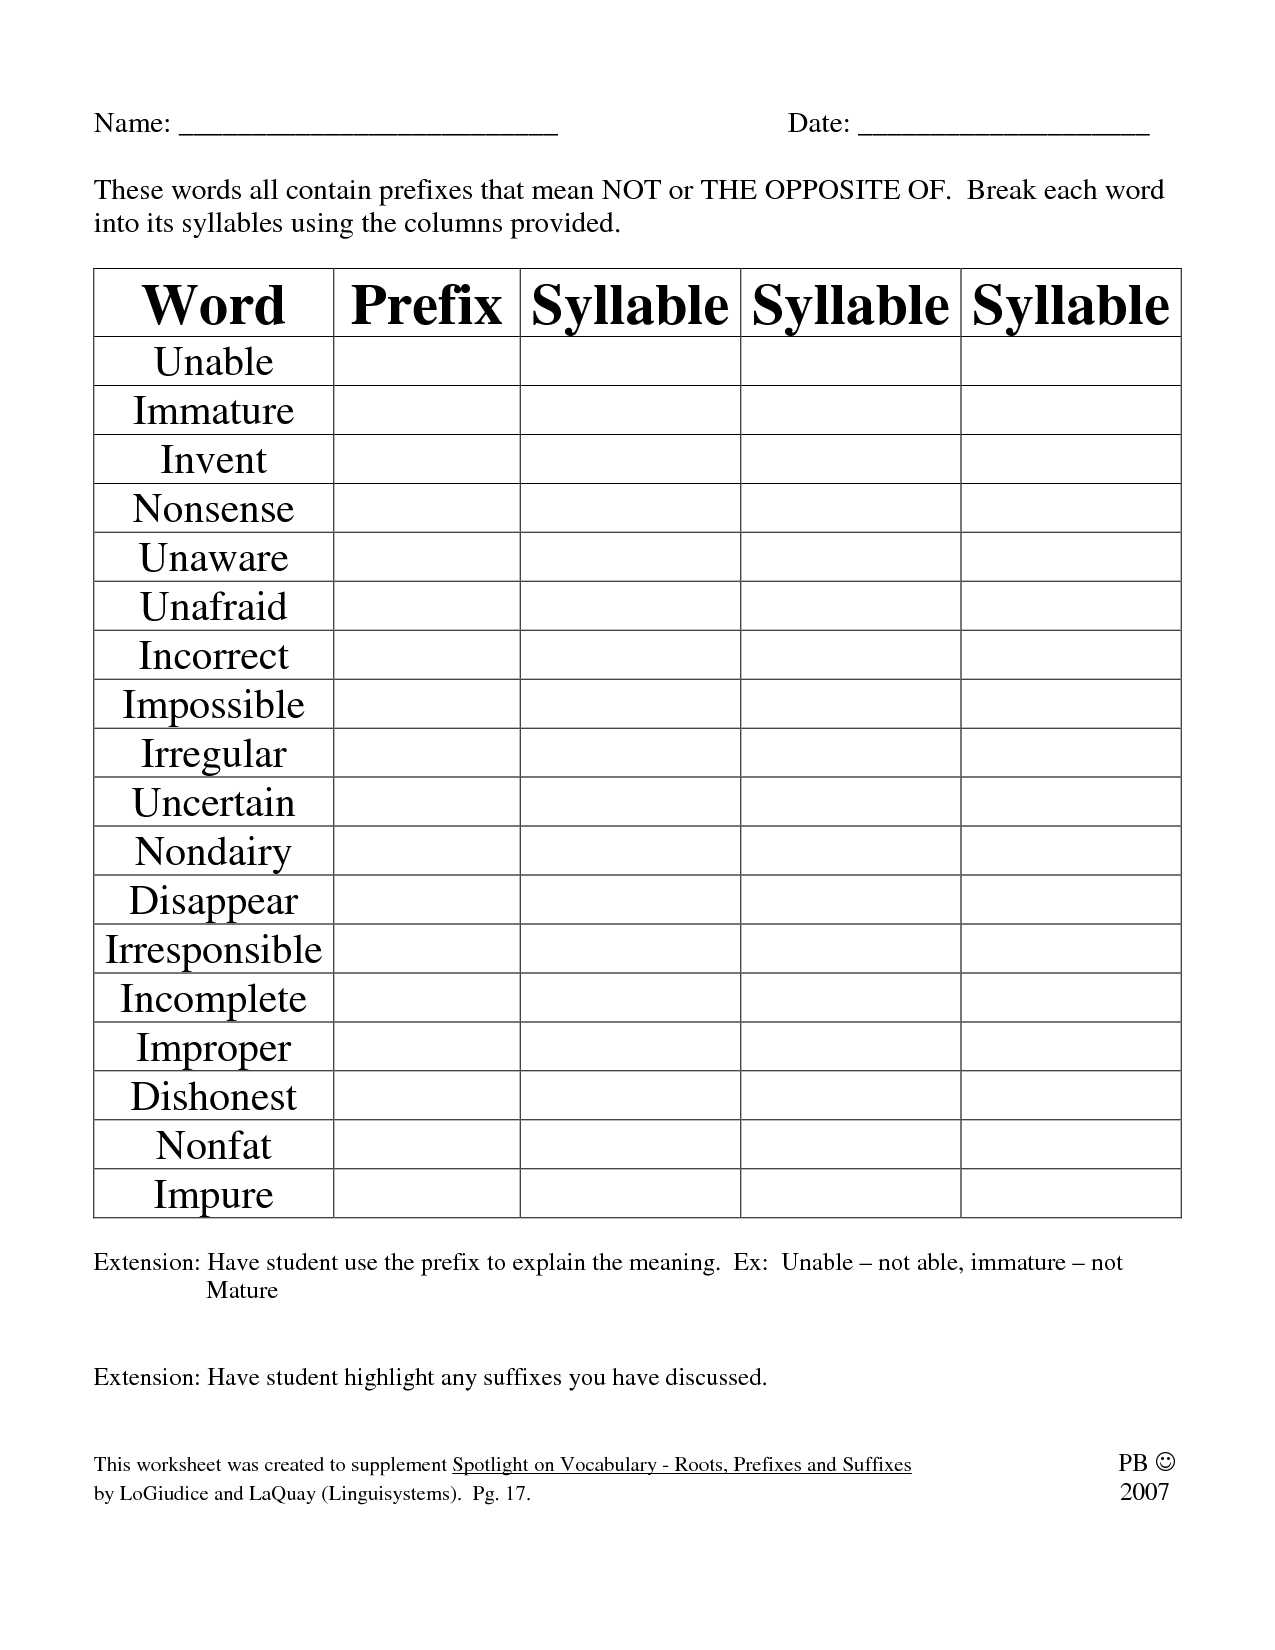 Health Worksheets Pdf Along with Ungewöhnlich Anatomy and Physiology Suffixes and Prefixes Galerie